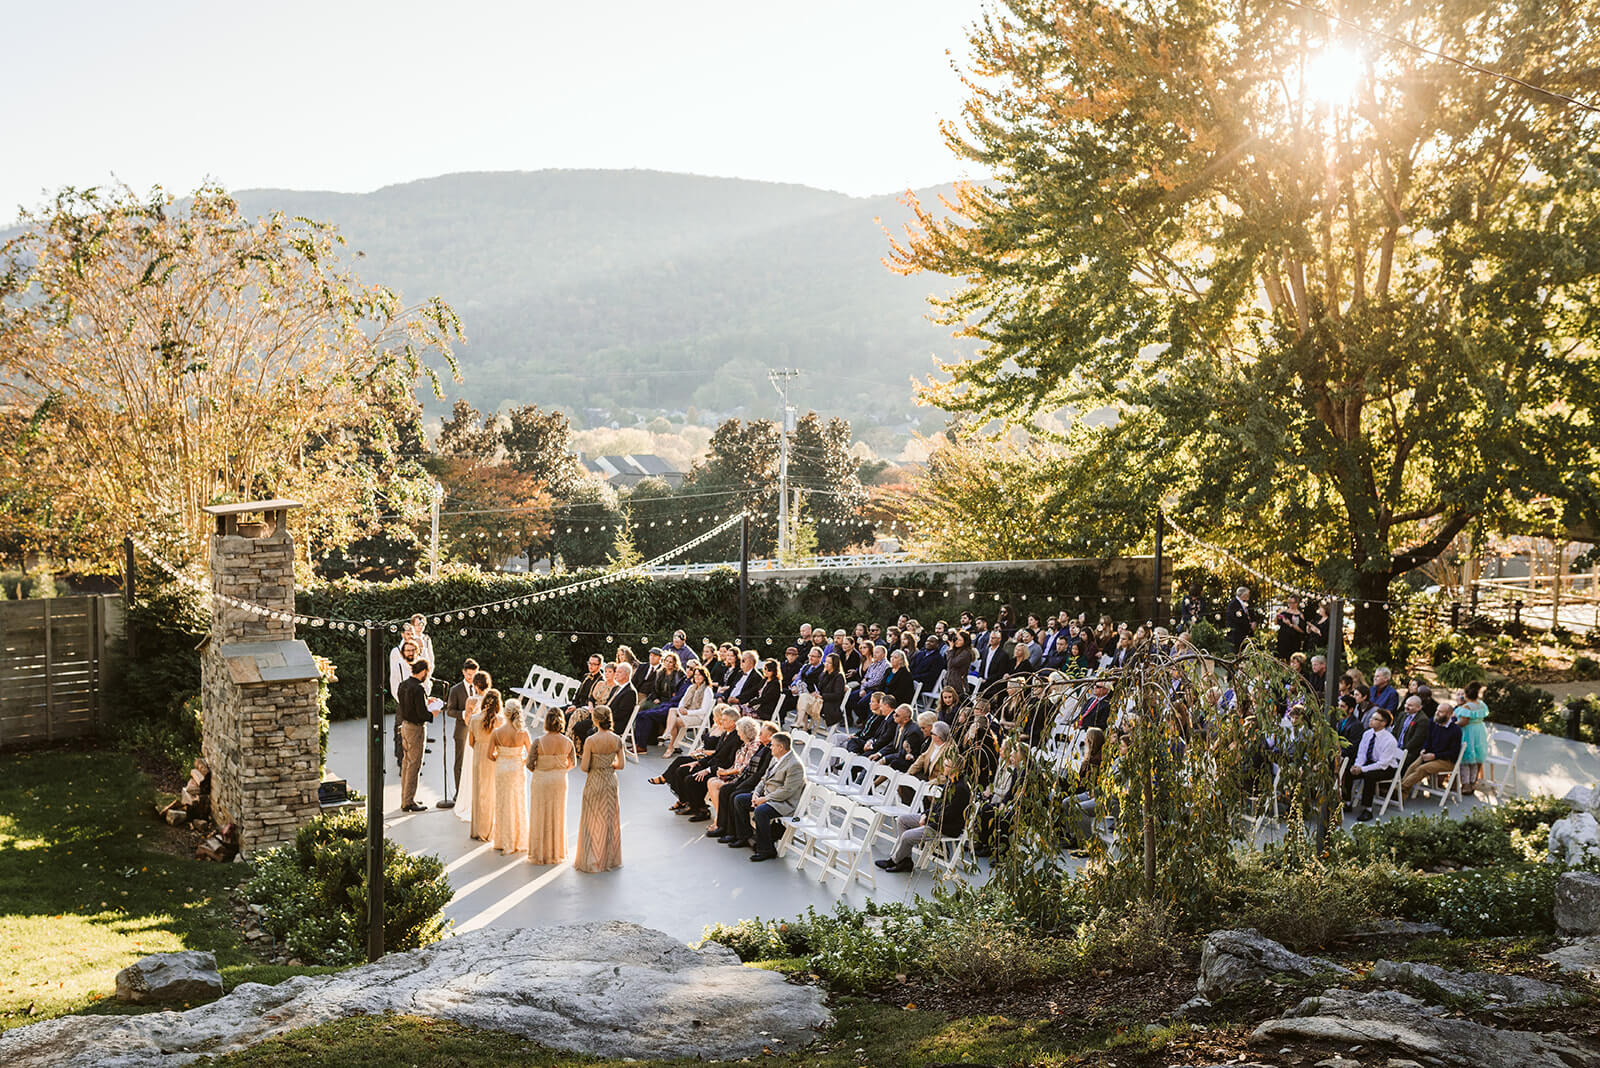 A bride and groom exchange vows in front of their guests at their mountain wedding venue in Chattanooga.